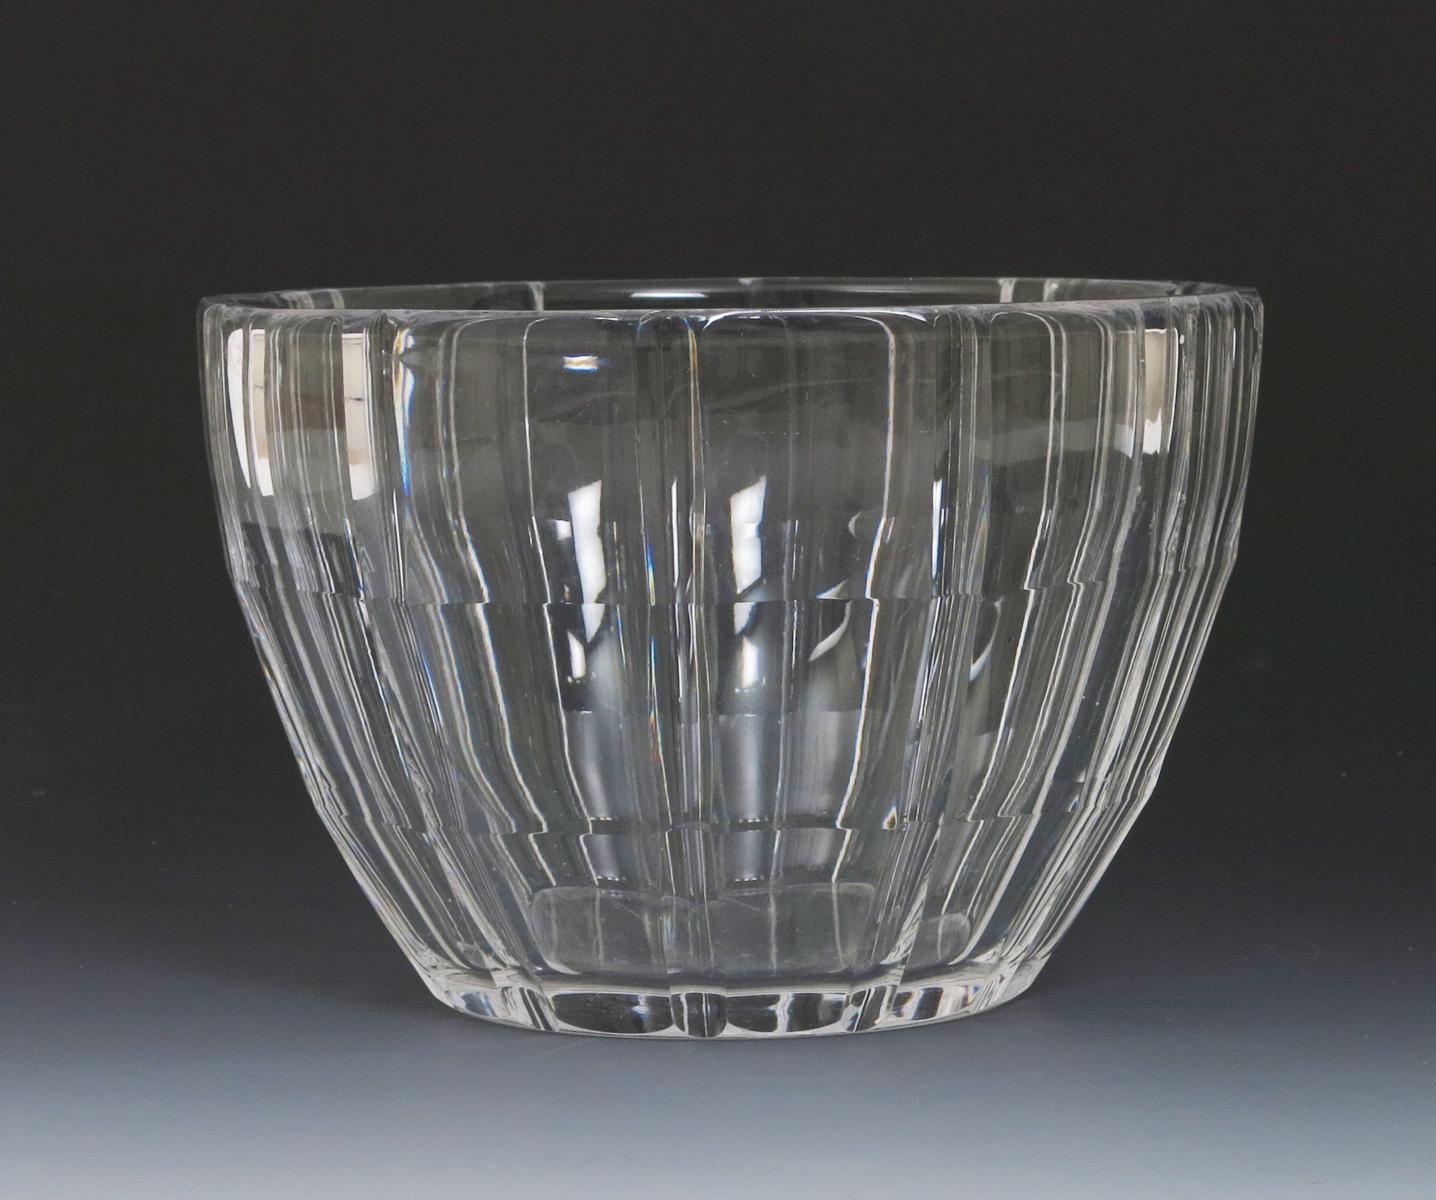 A Stevens & Williams cut glass bowl designed by Keith Murray,  flaring, faceted form acid etched